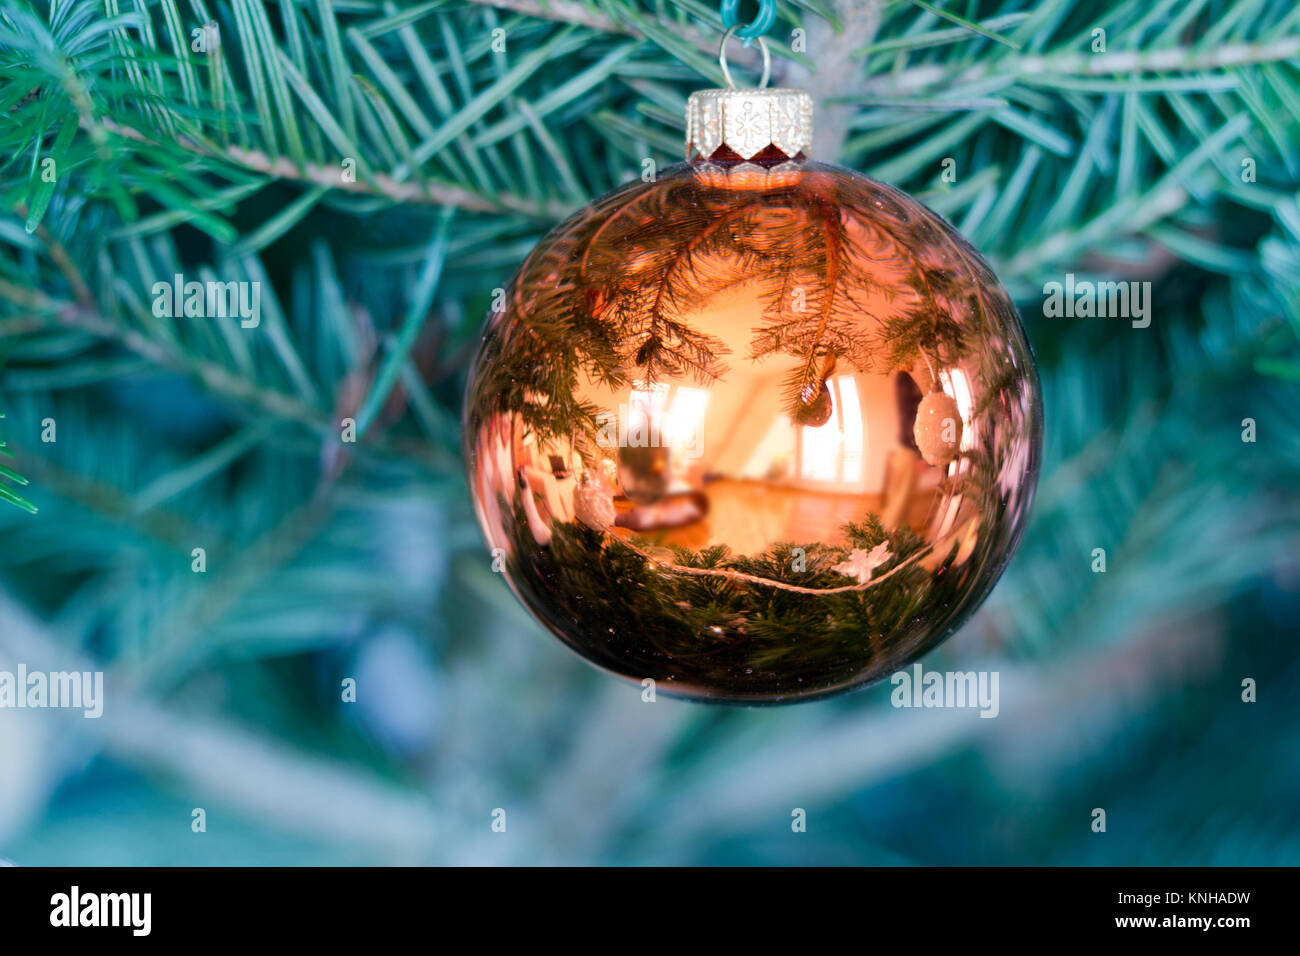 Orange christmas bauble closeup on christmas tree Banque D'Images